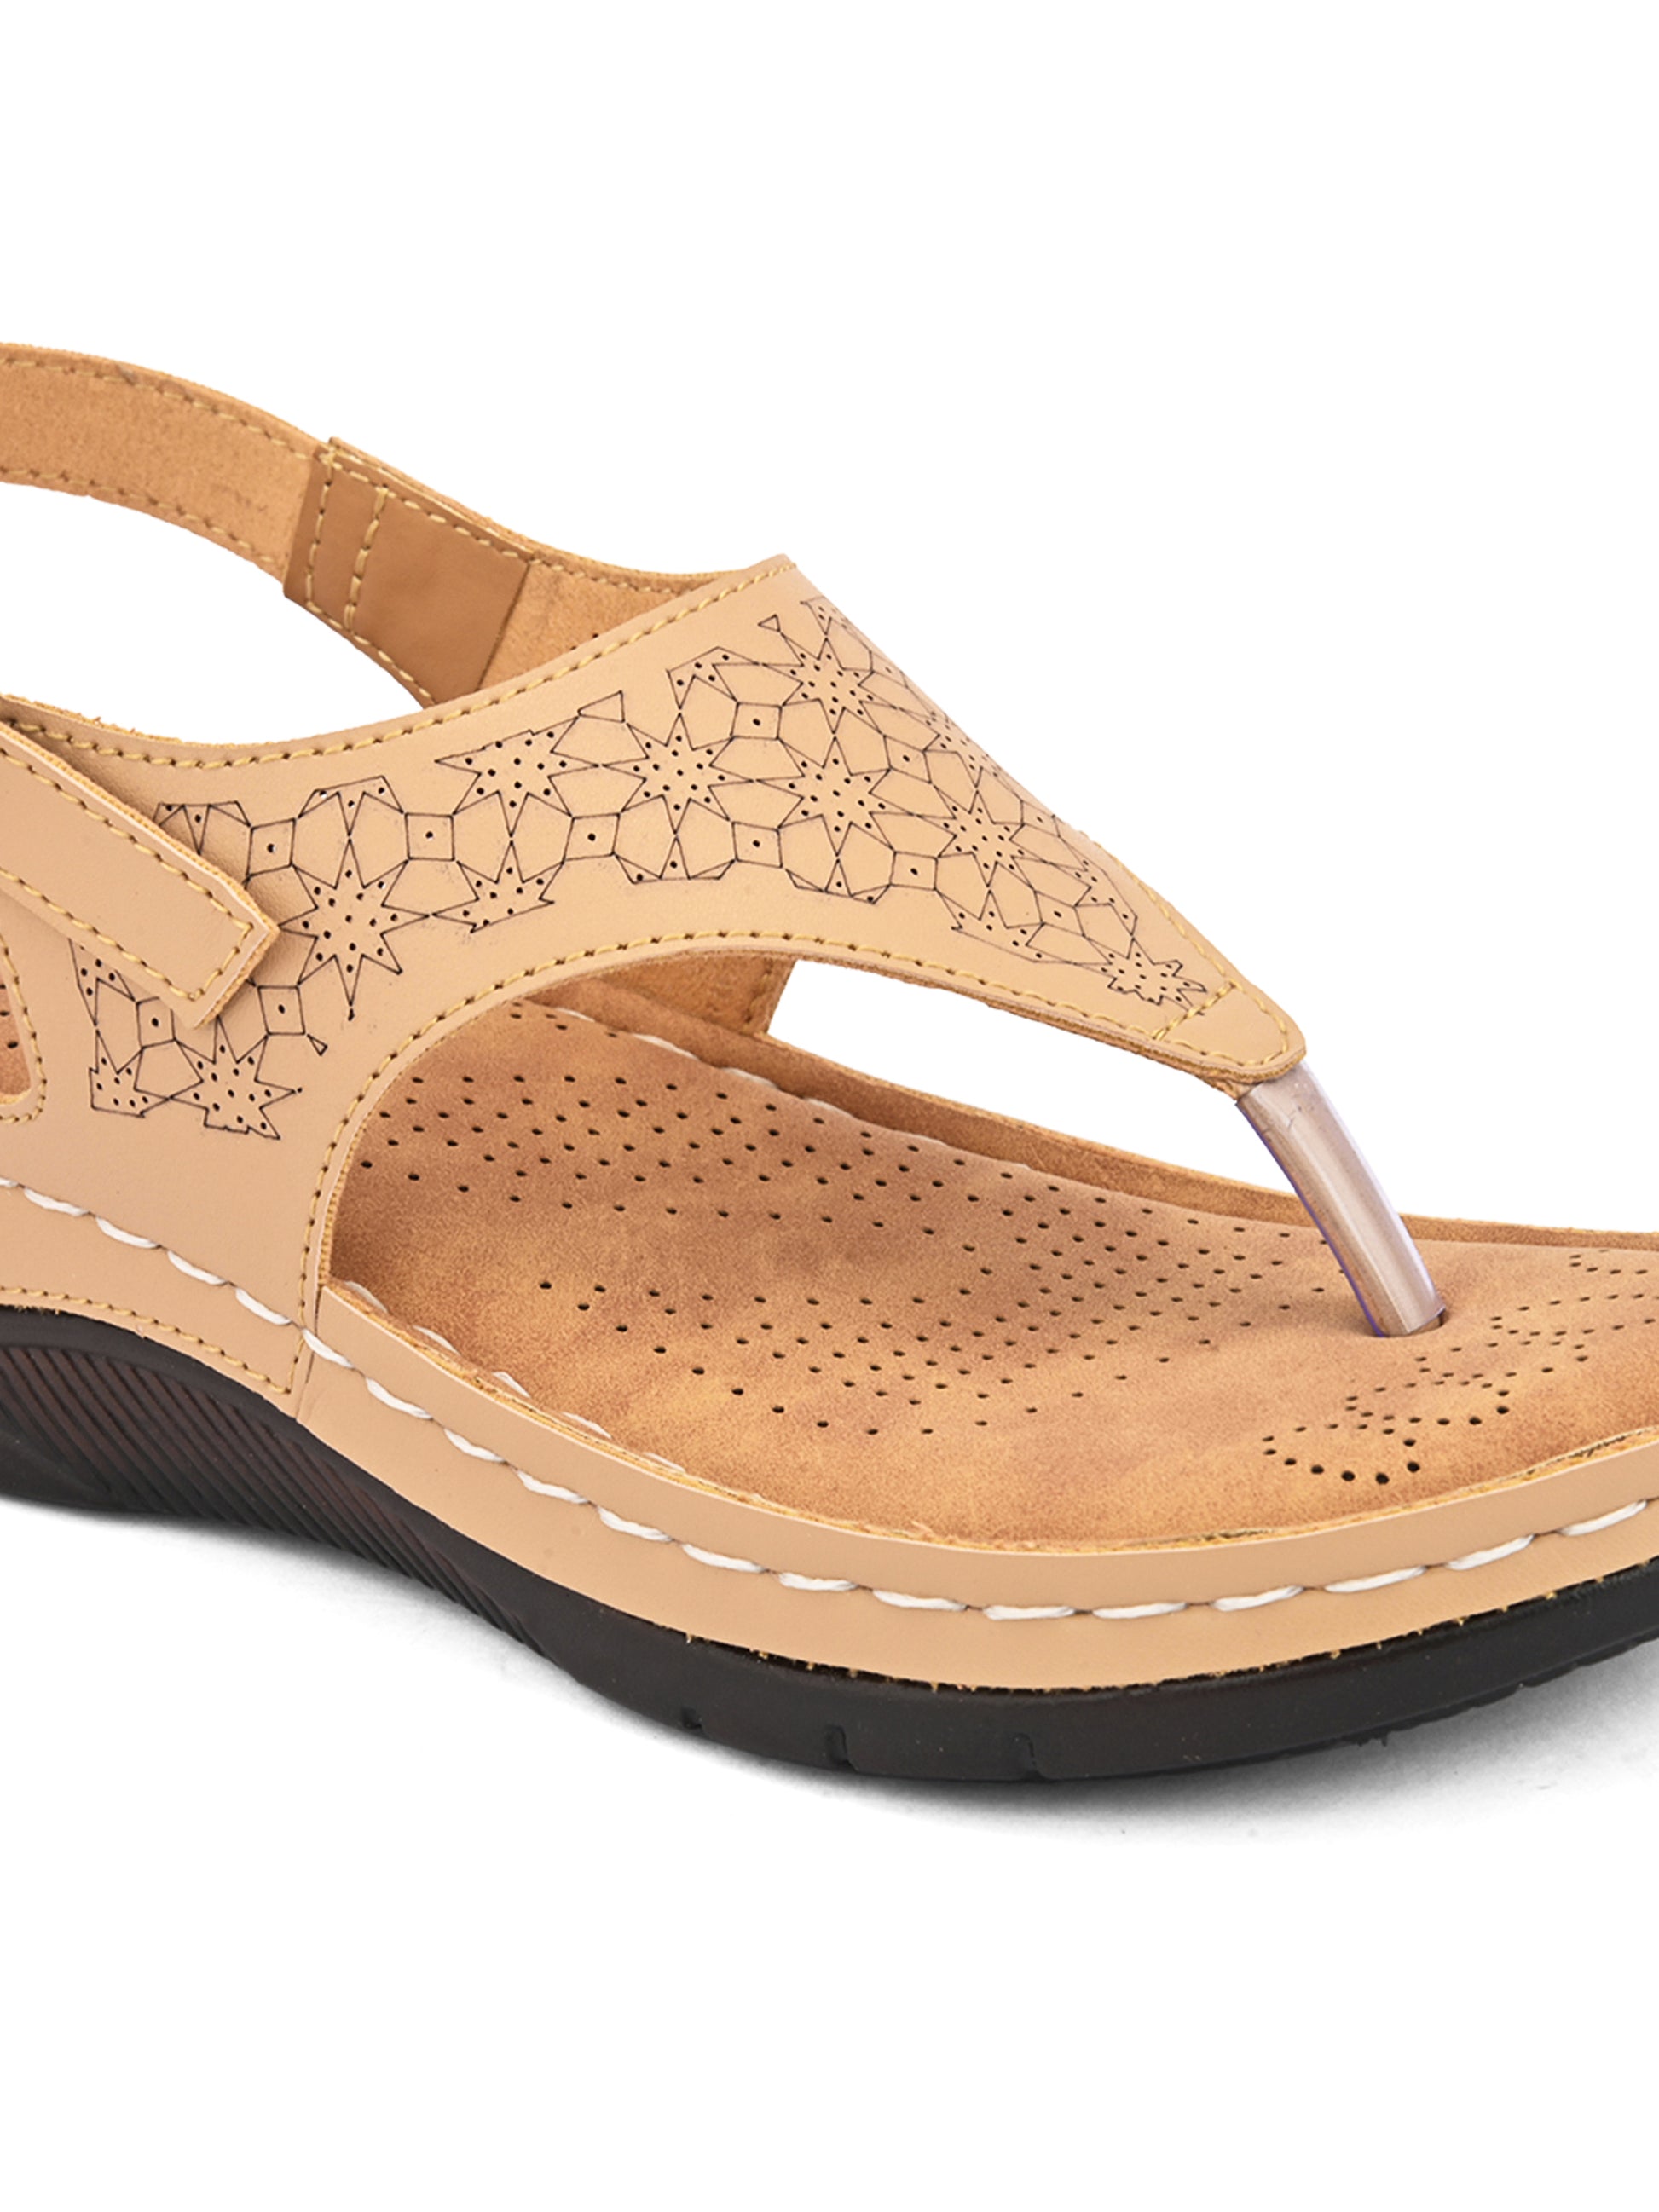 Buy Women's Footwear Online: Sandals and Chappals - Woccy